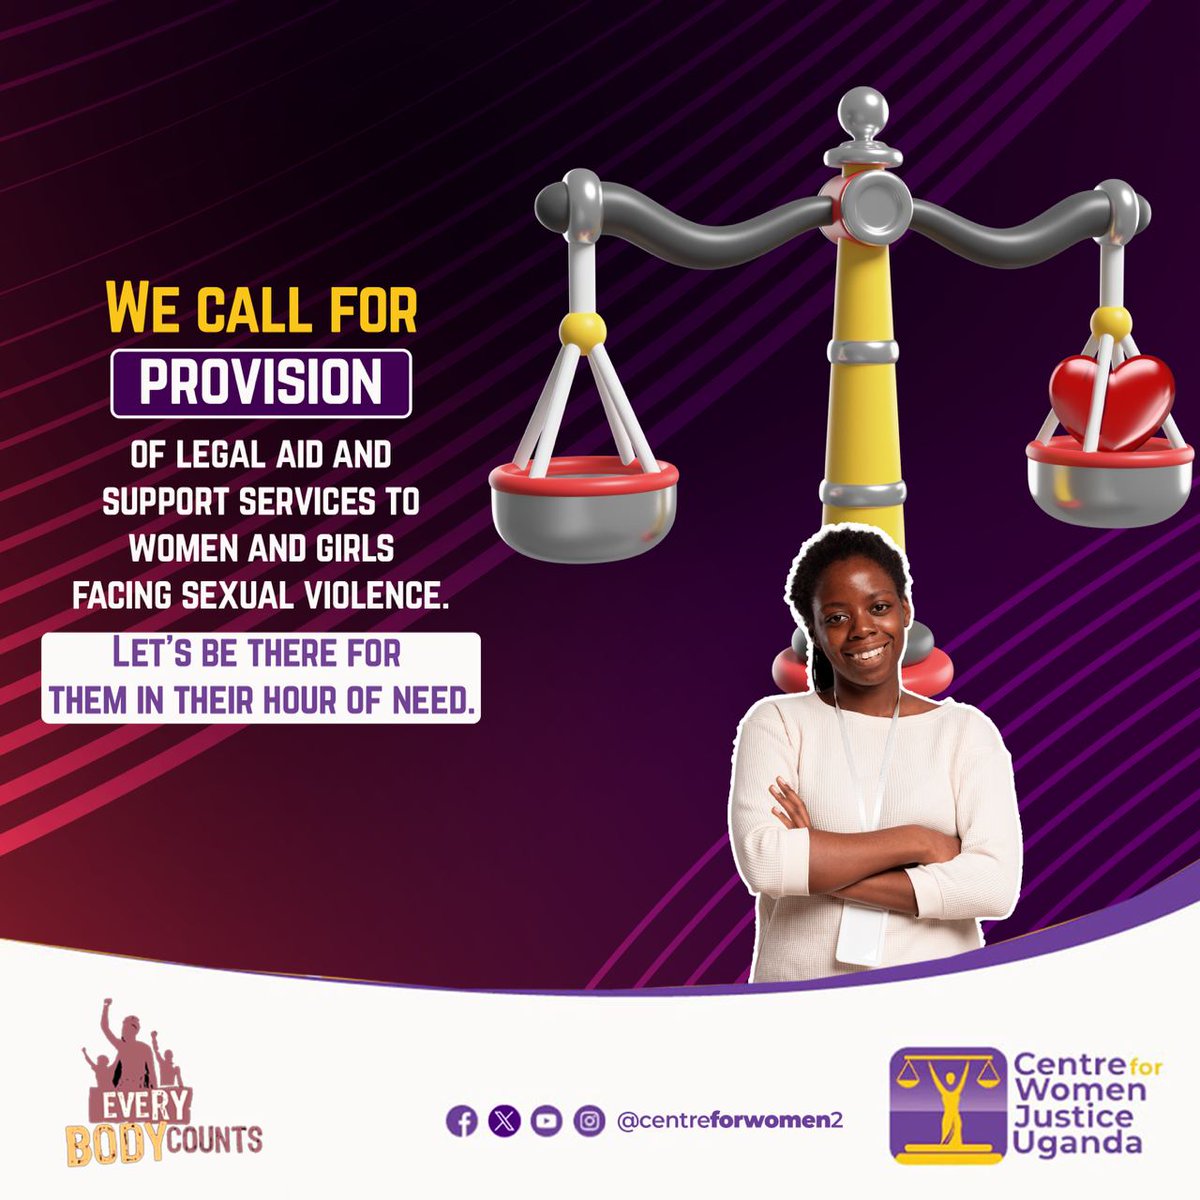 Legal Aid is crucial for survivors of Sexual and Gender Based Violence to access justice and tell their stories. Let's help them find redemption. ✊🏿 #CentreforWomenJusticeUganda #SexualAssaultAwarenessMonth